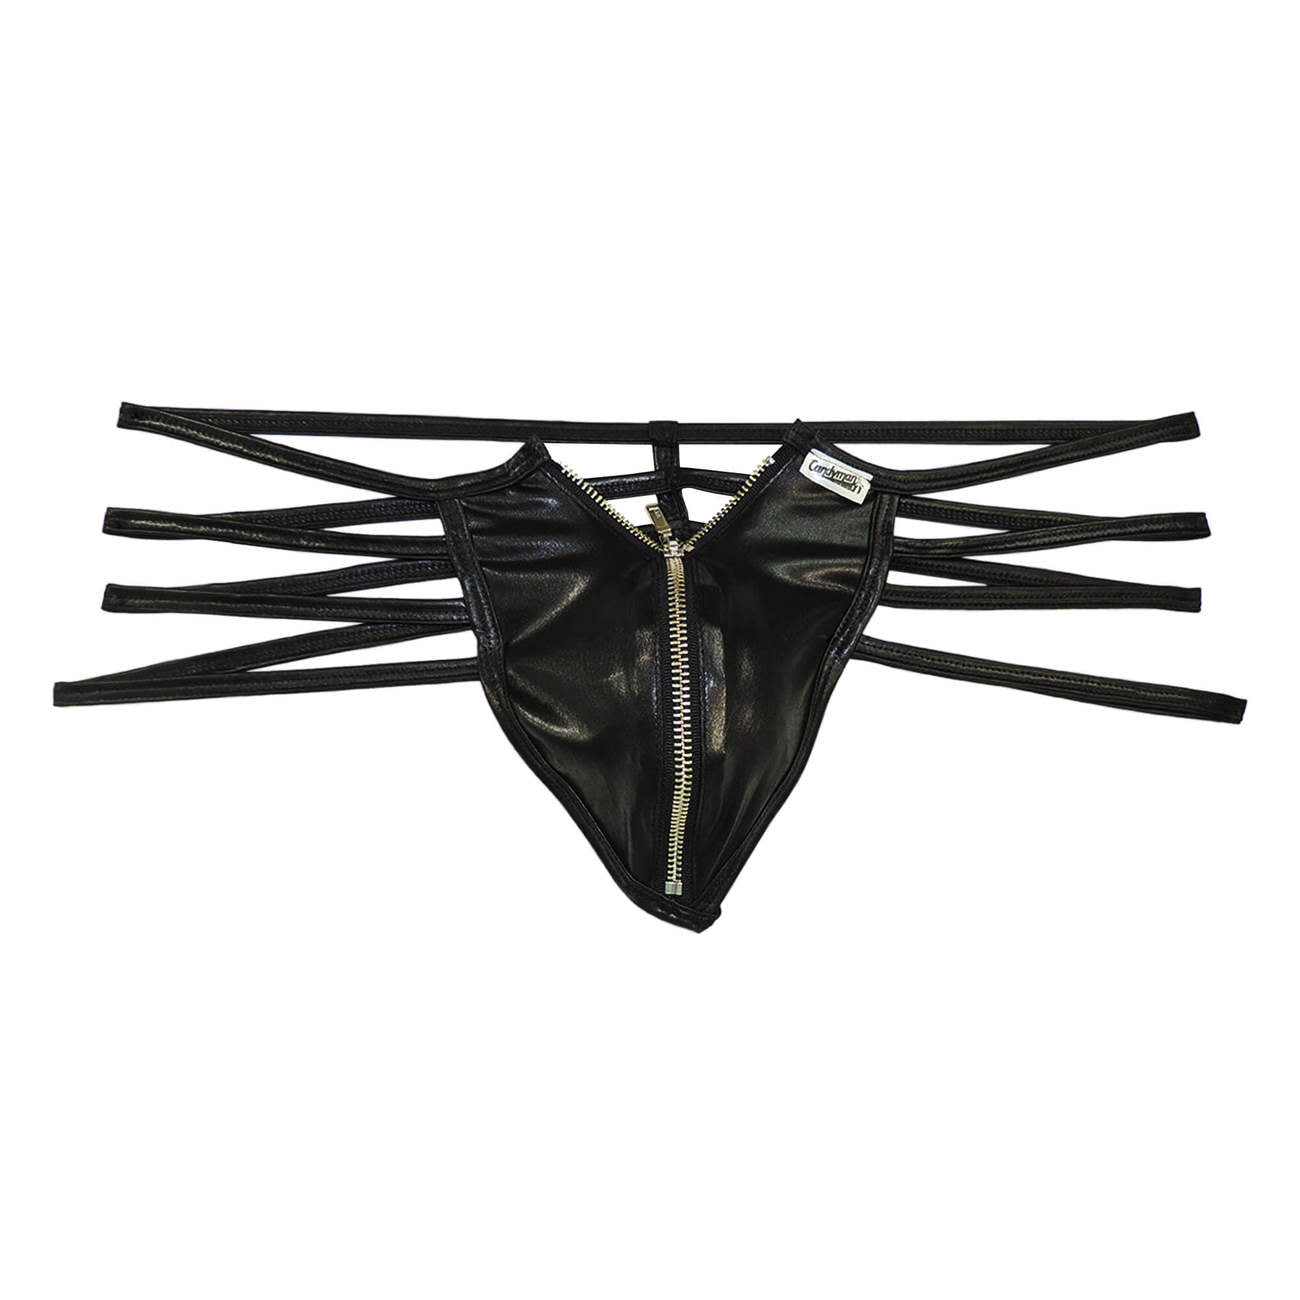 under-yours - Thong - CandyMan - Mens Underwear